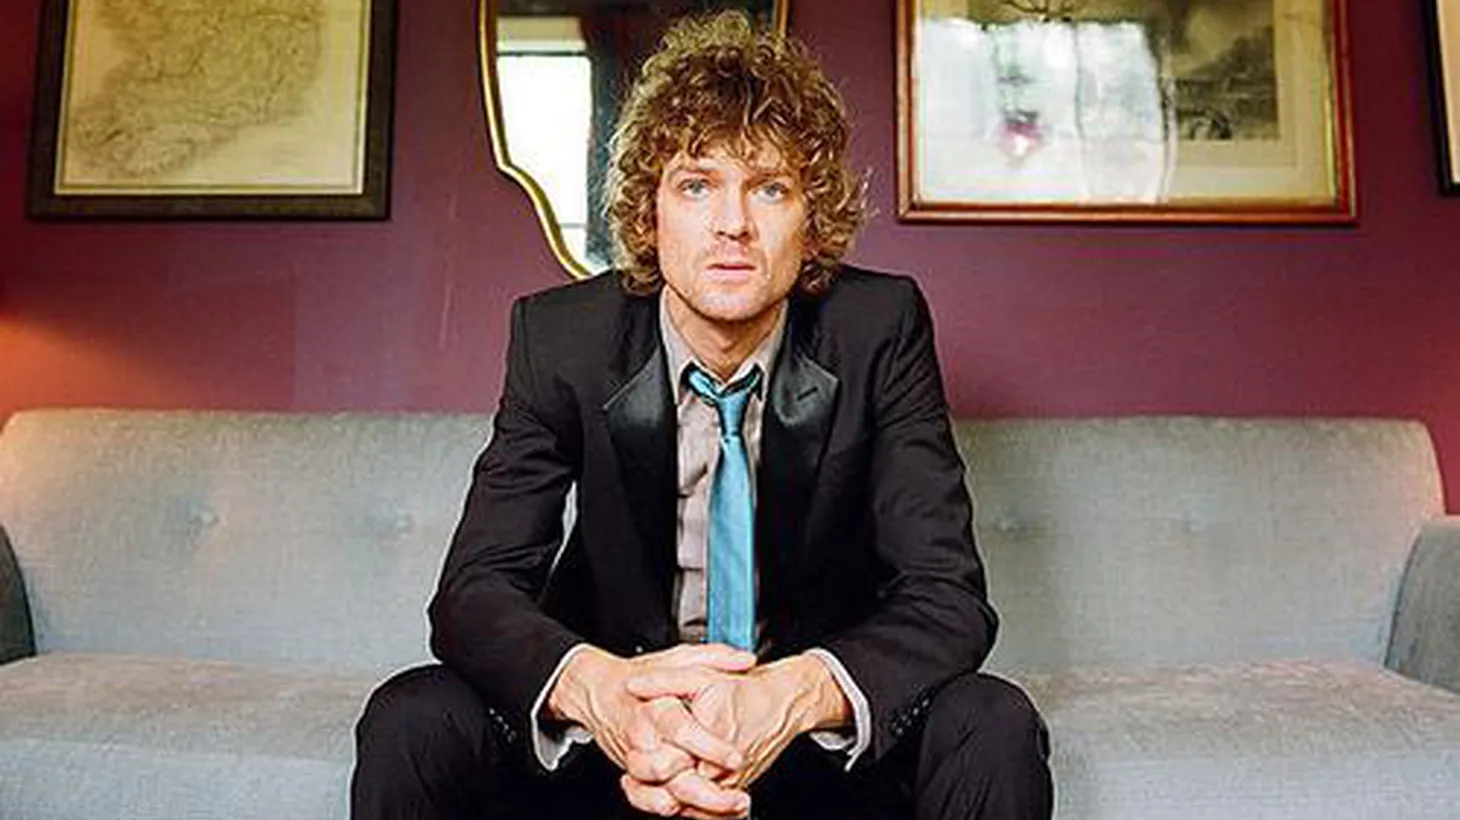 Perhaps best known for his work with rockers the Raconteurs, Brendan Benson is an expert at pop song-craft, which he explores in his solo work.